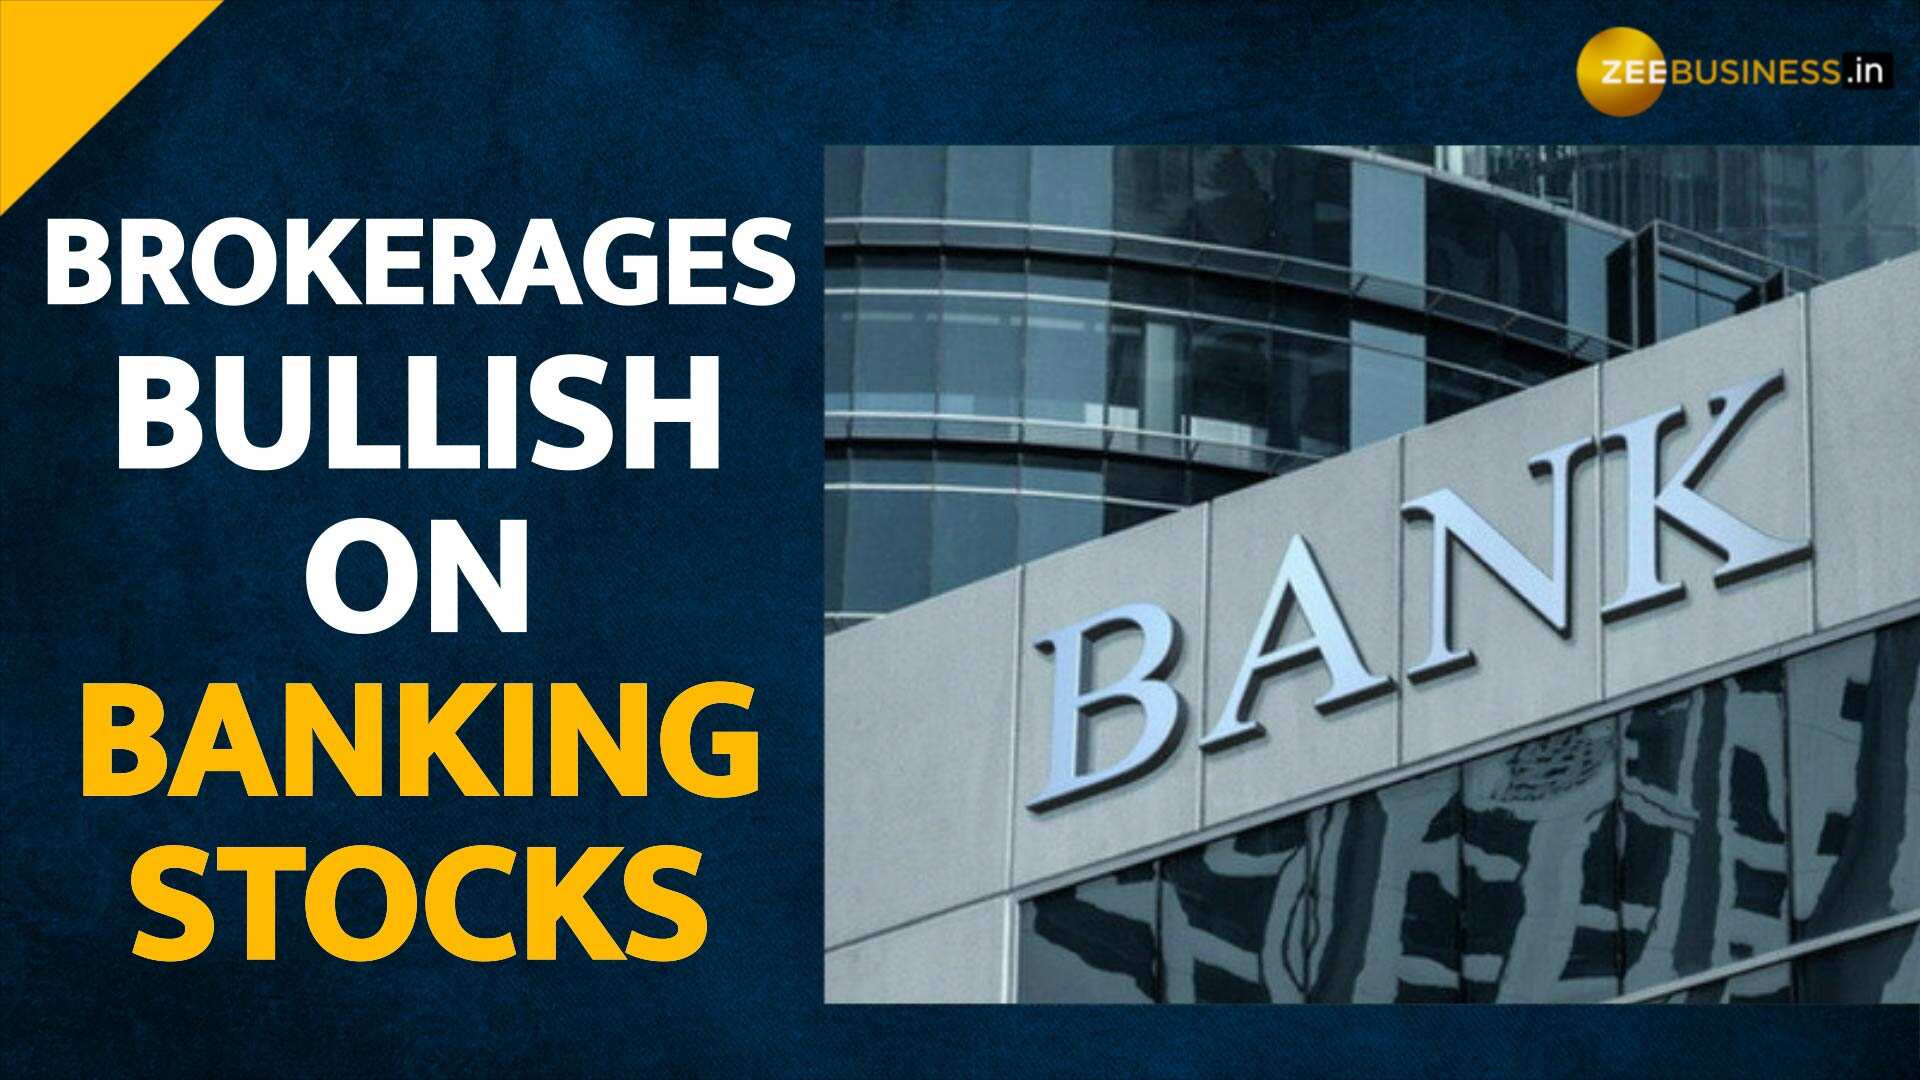 Brokerages Bullish On Banking Stocks Pick Icici Bank Axis Bank As Their Top Bets Zee Business 9933